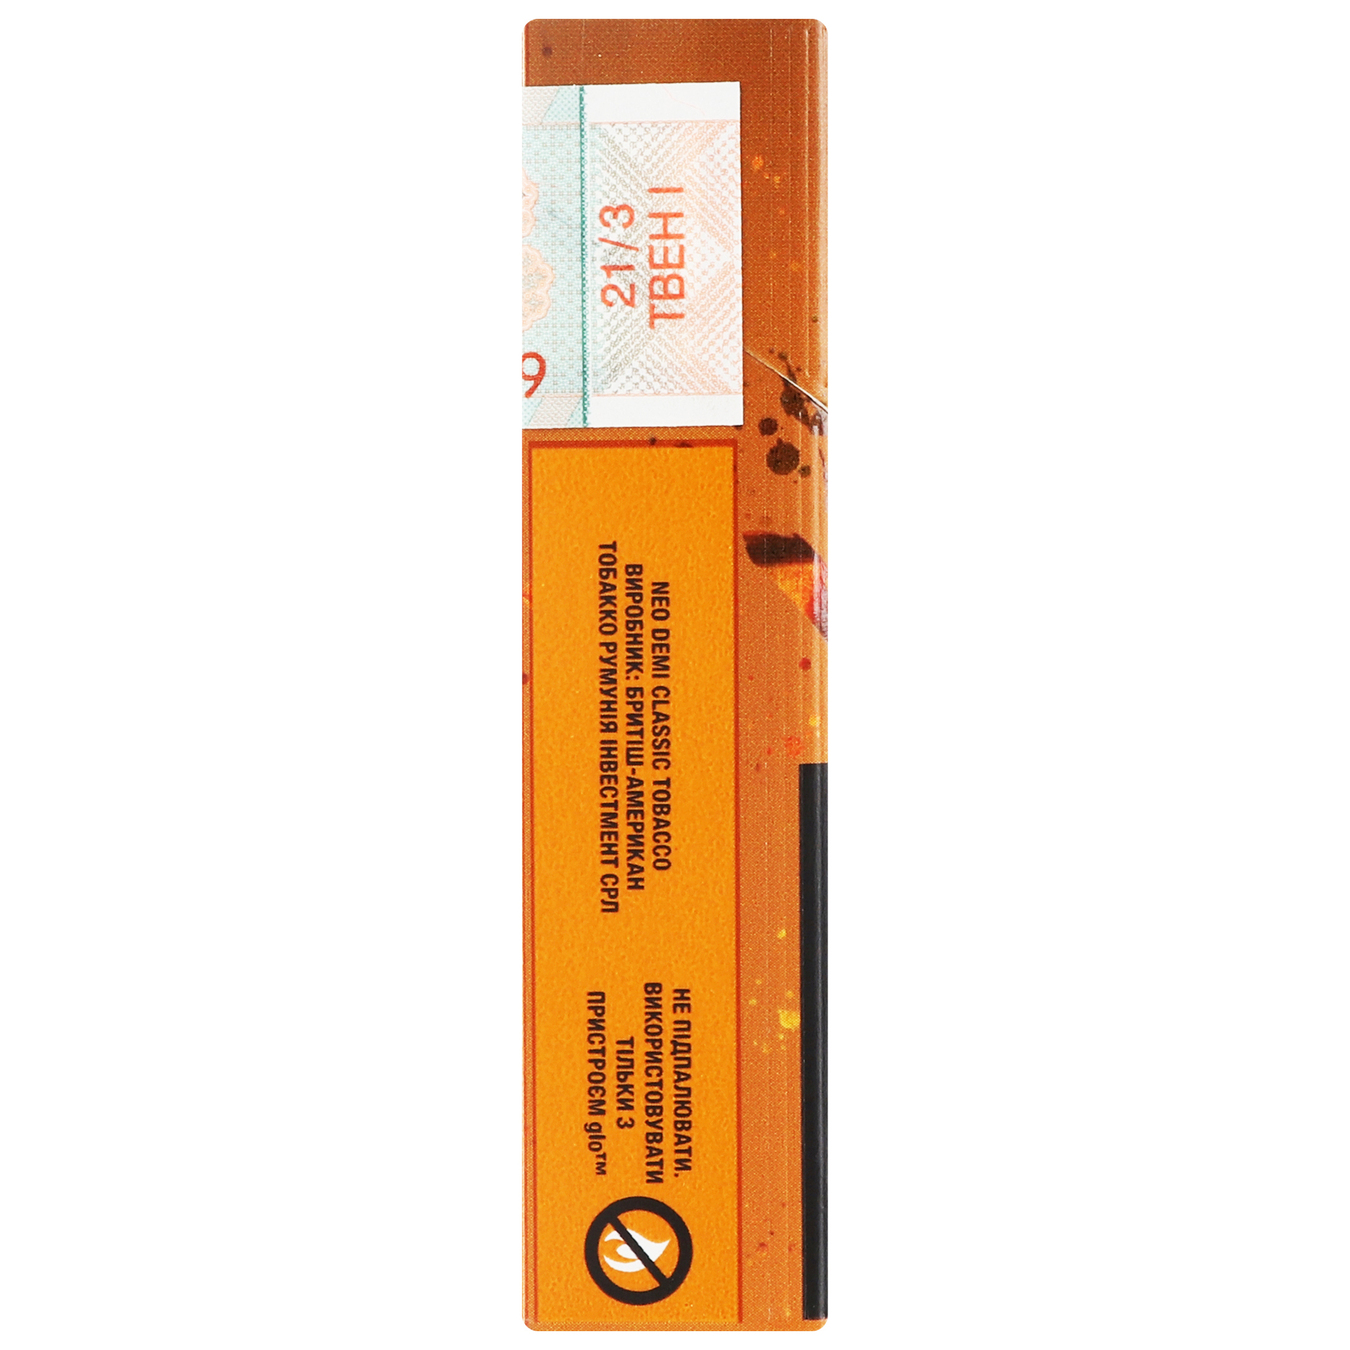 Sticks Neo Demi Classic Tobacco tobacco containing 20pcs (the price is indicated without excise tax) 2